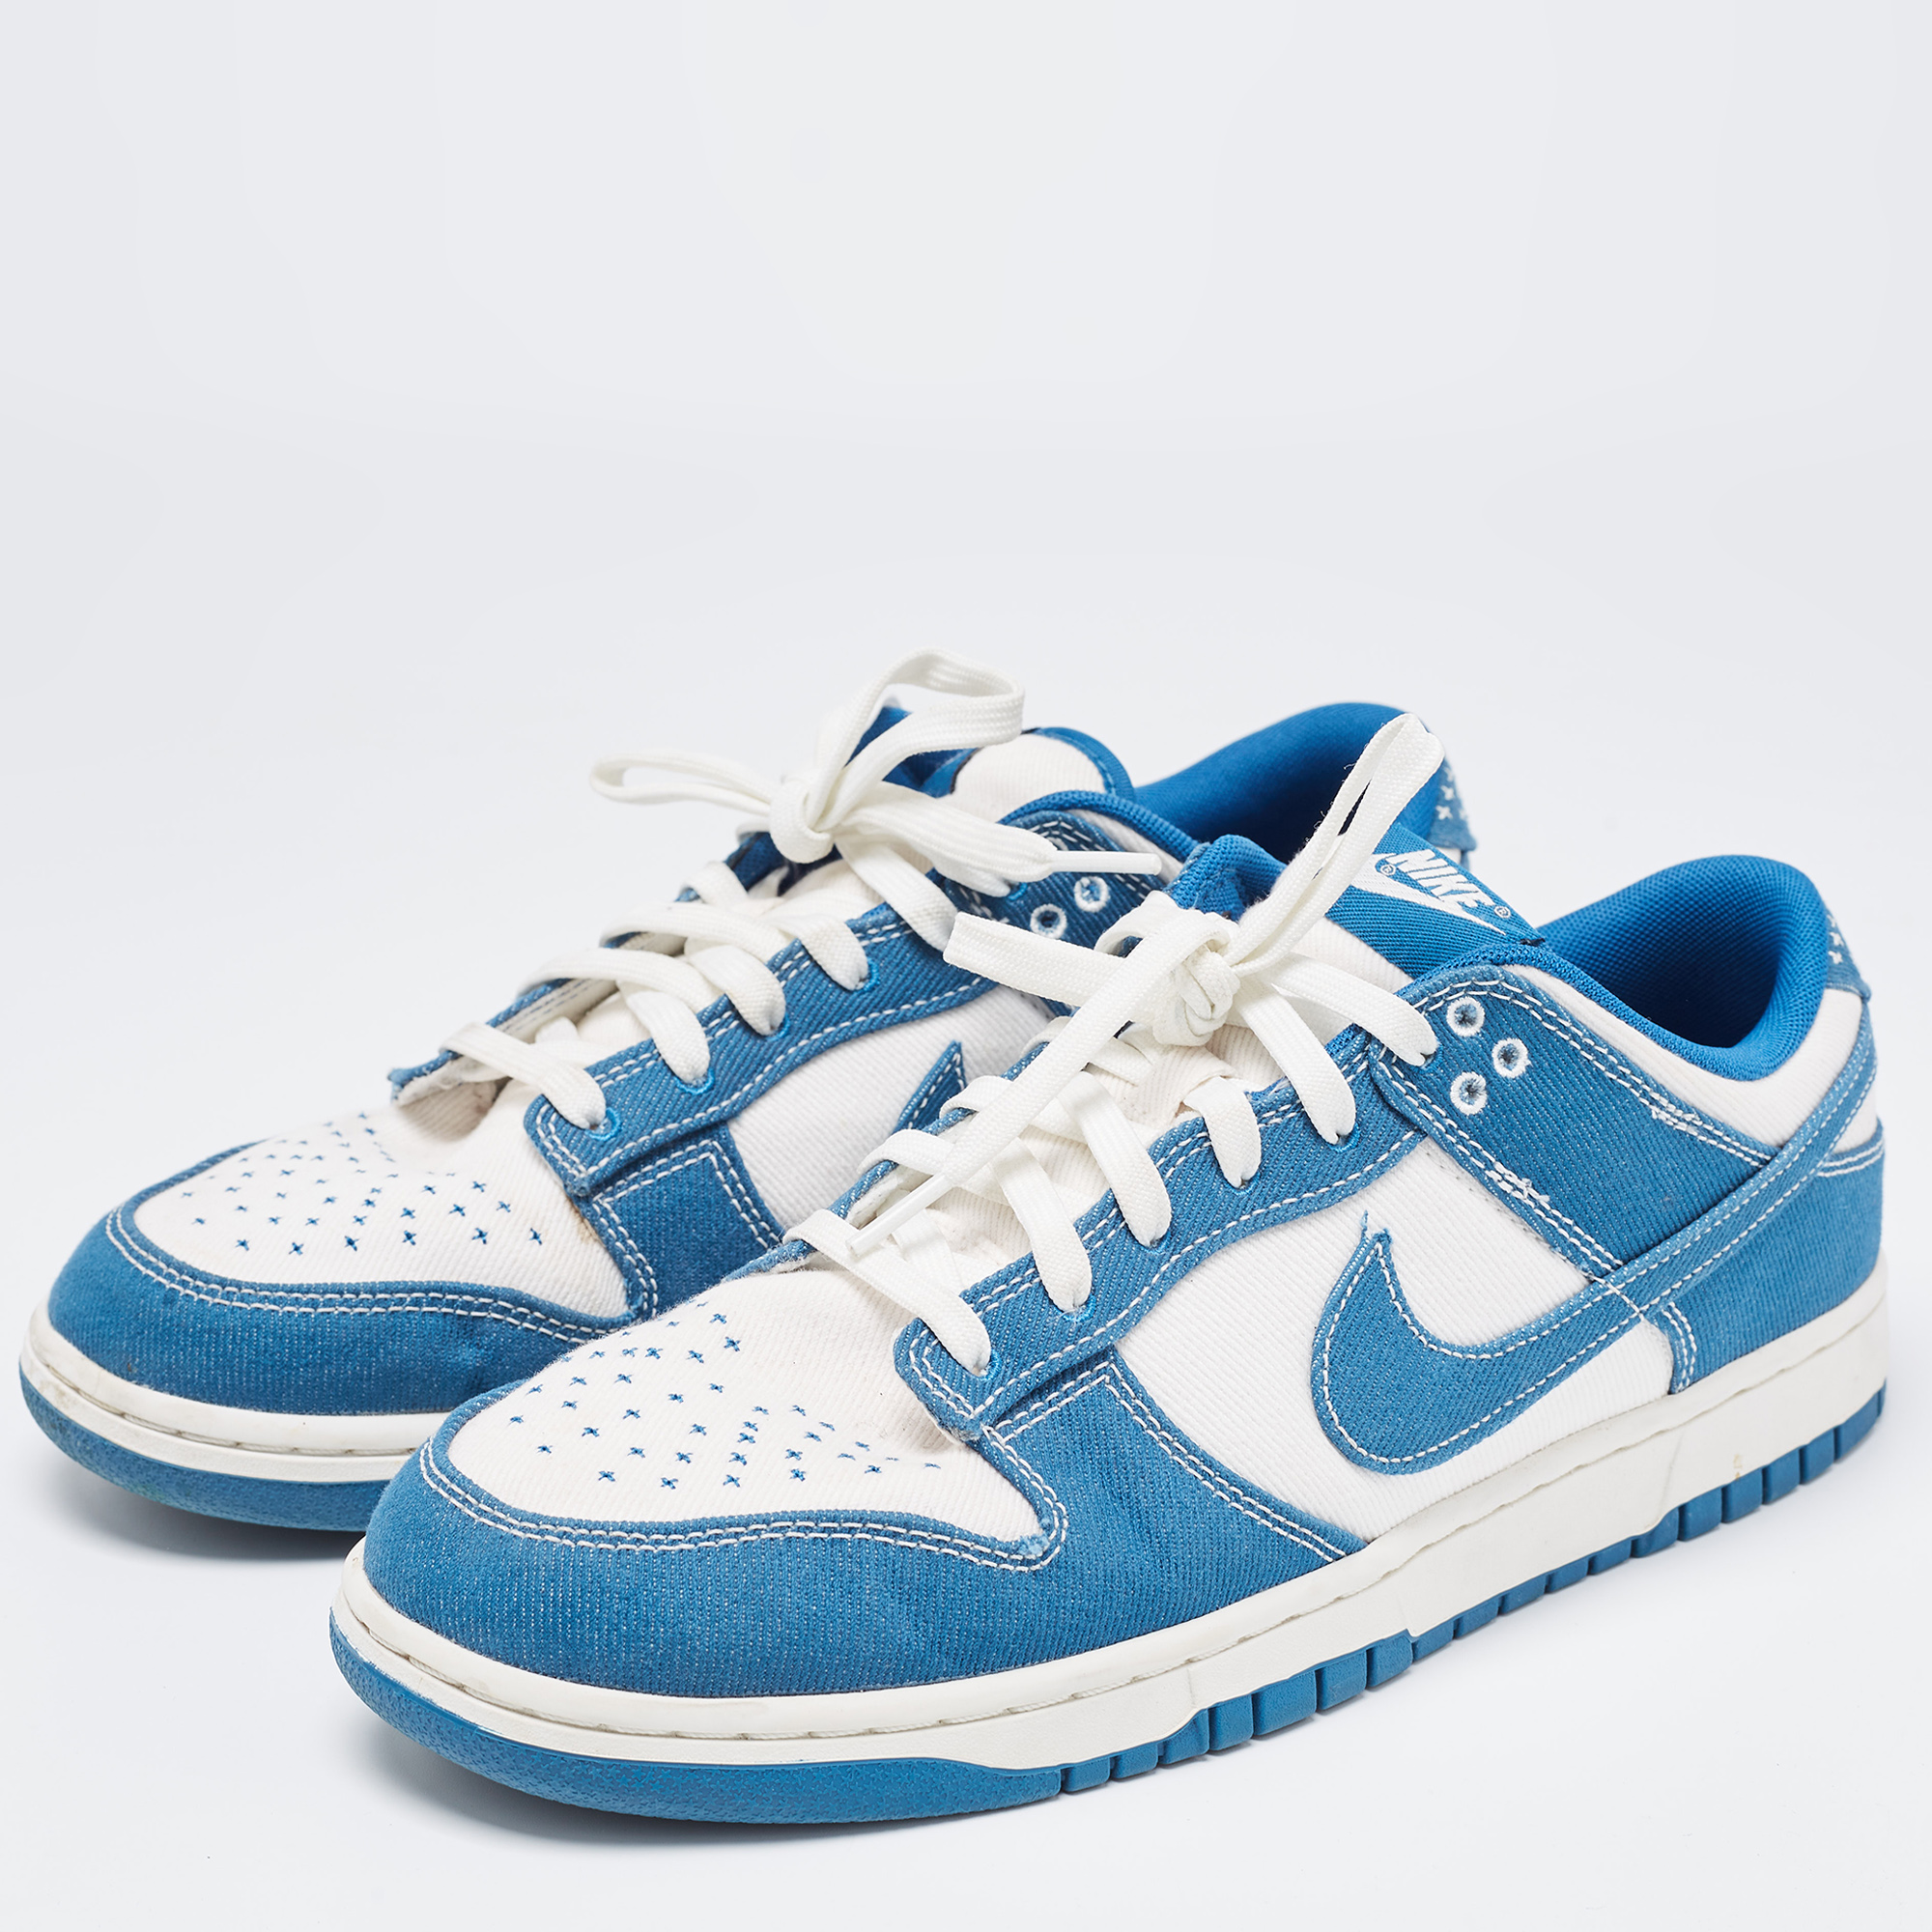 

Nike SB Blue/White Canvas Dunk Low Cloth Low Top Trainers Sneakers Size